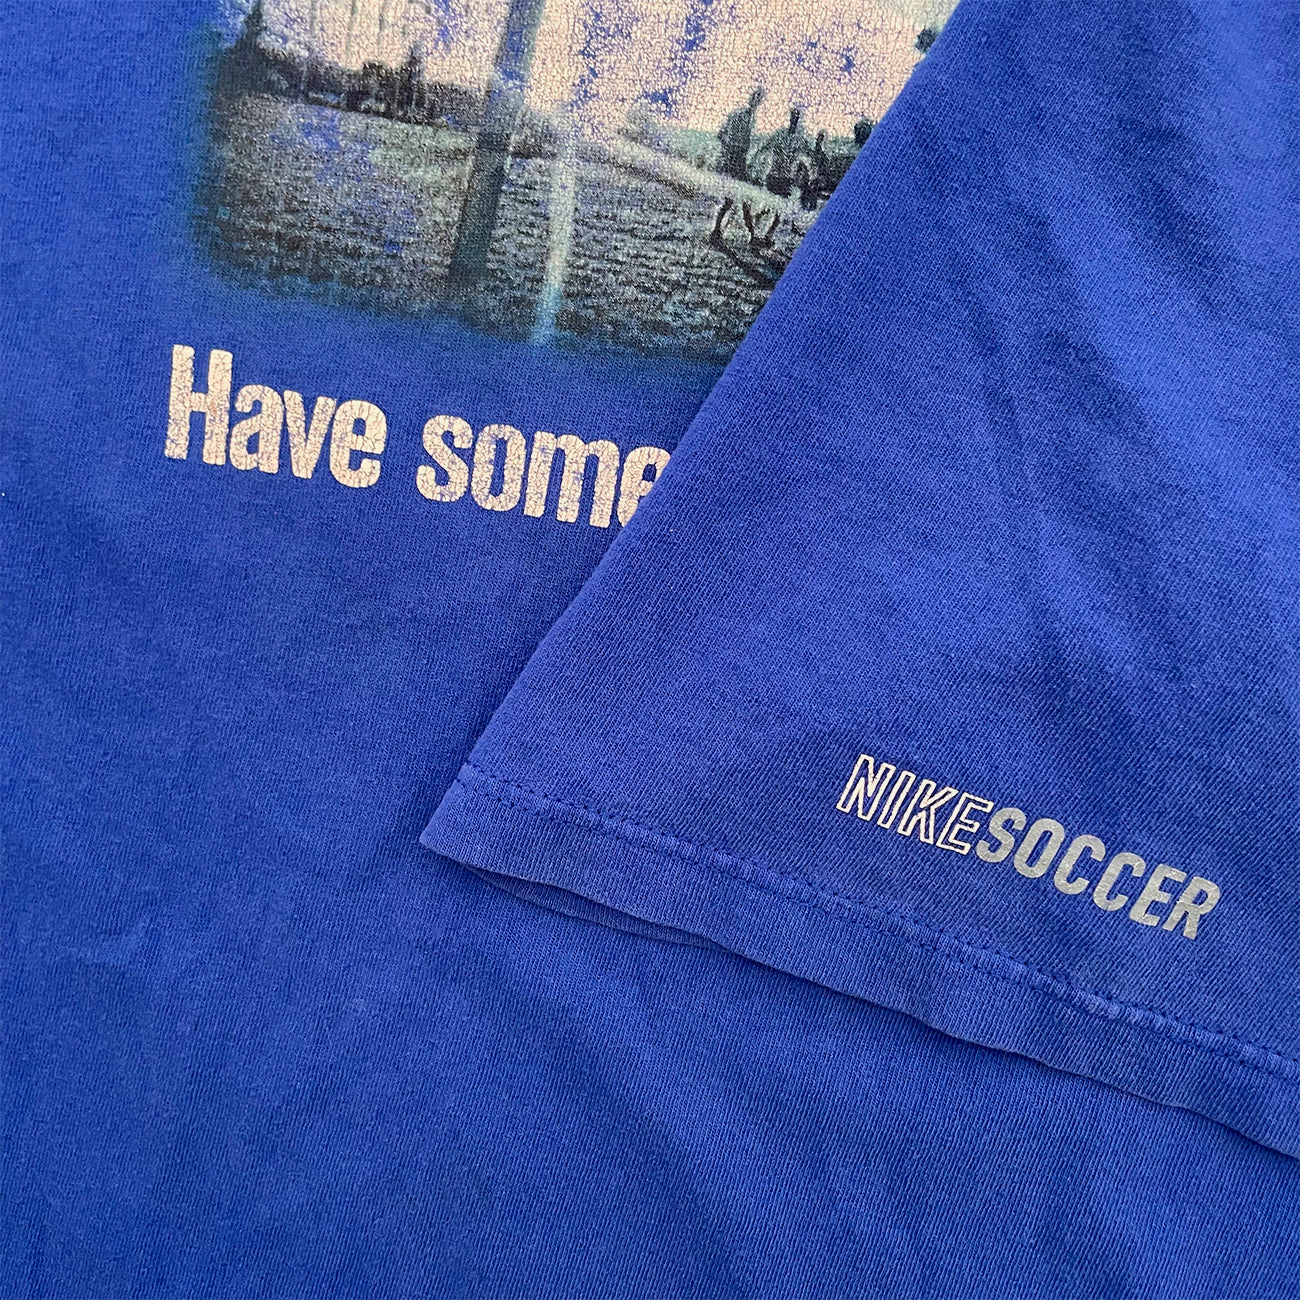 Nike "Have Some Goals" T-Shirt - XL